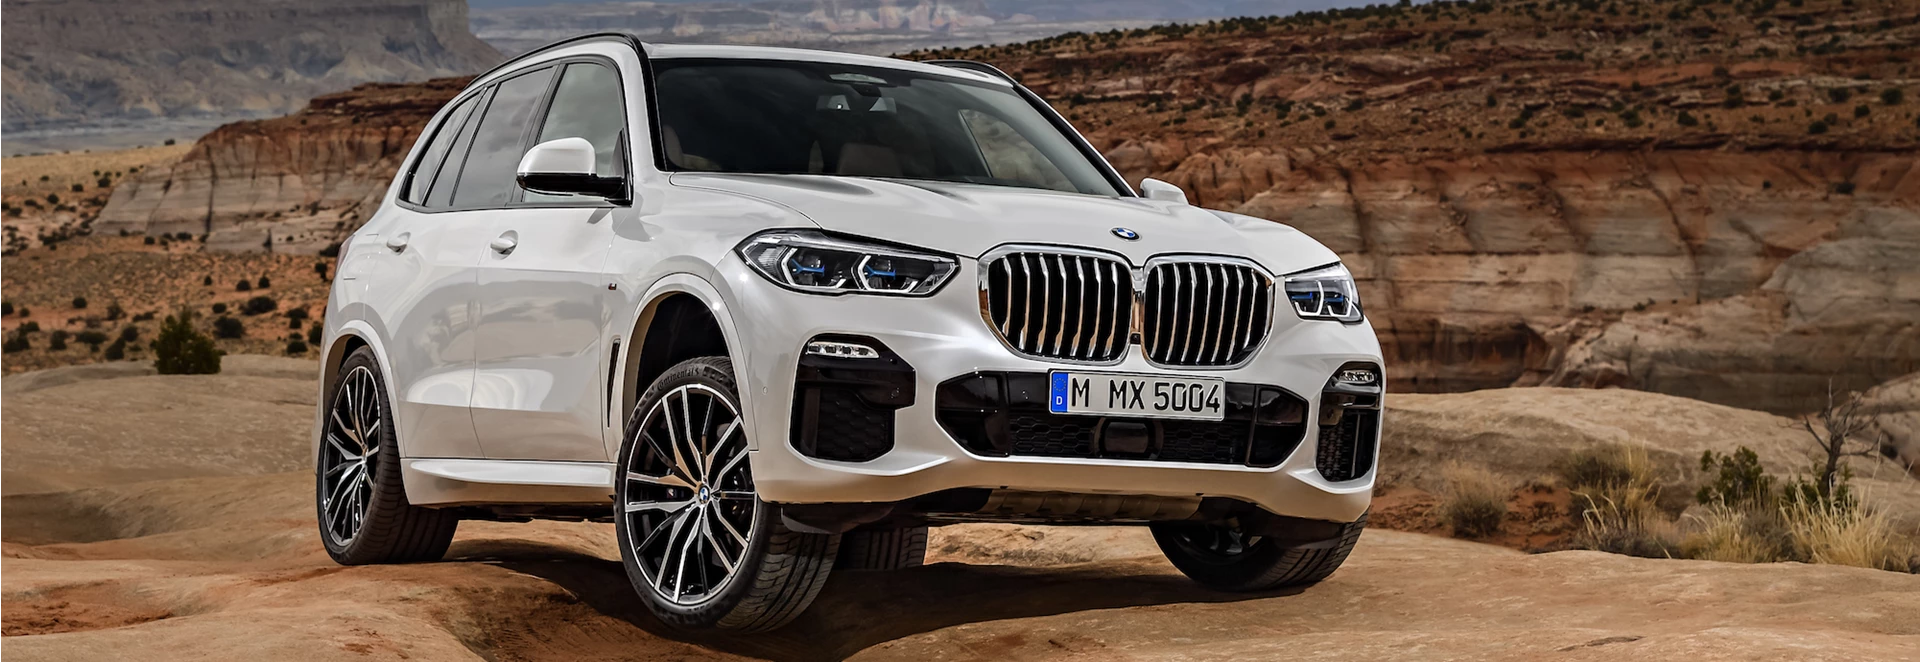 Guide to BMW X range - which one should you buy?